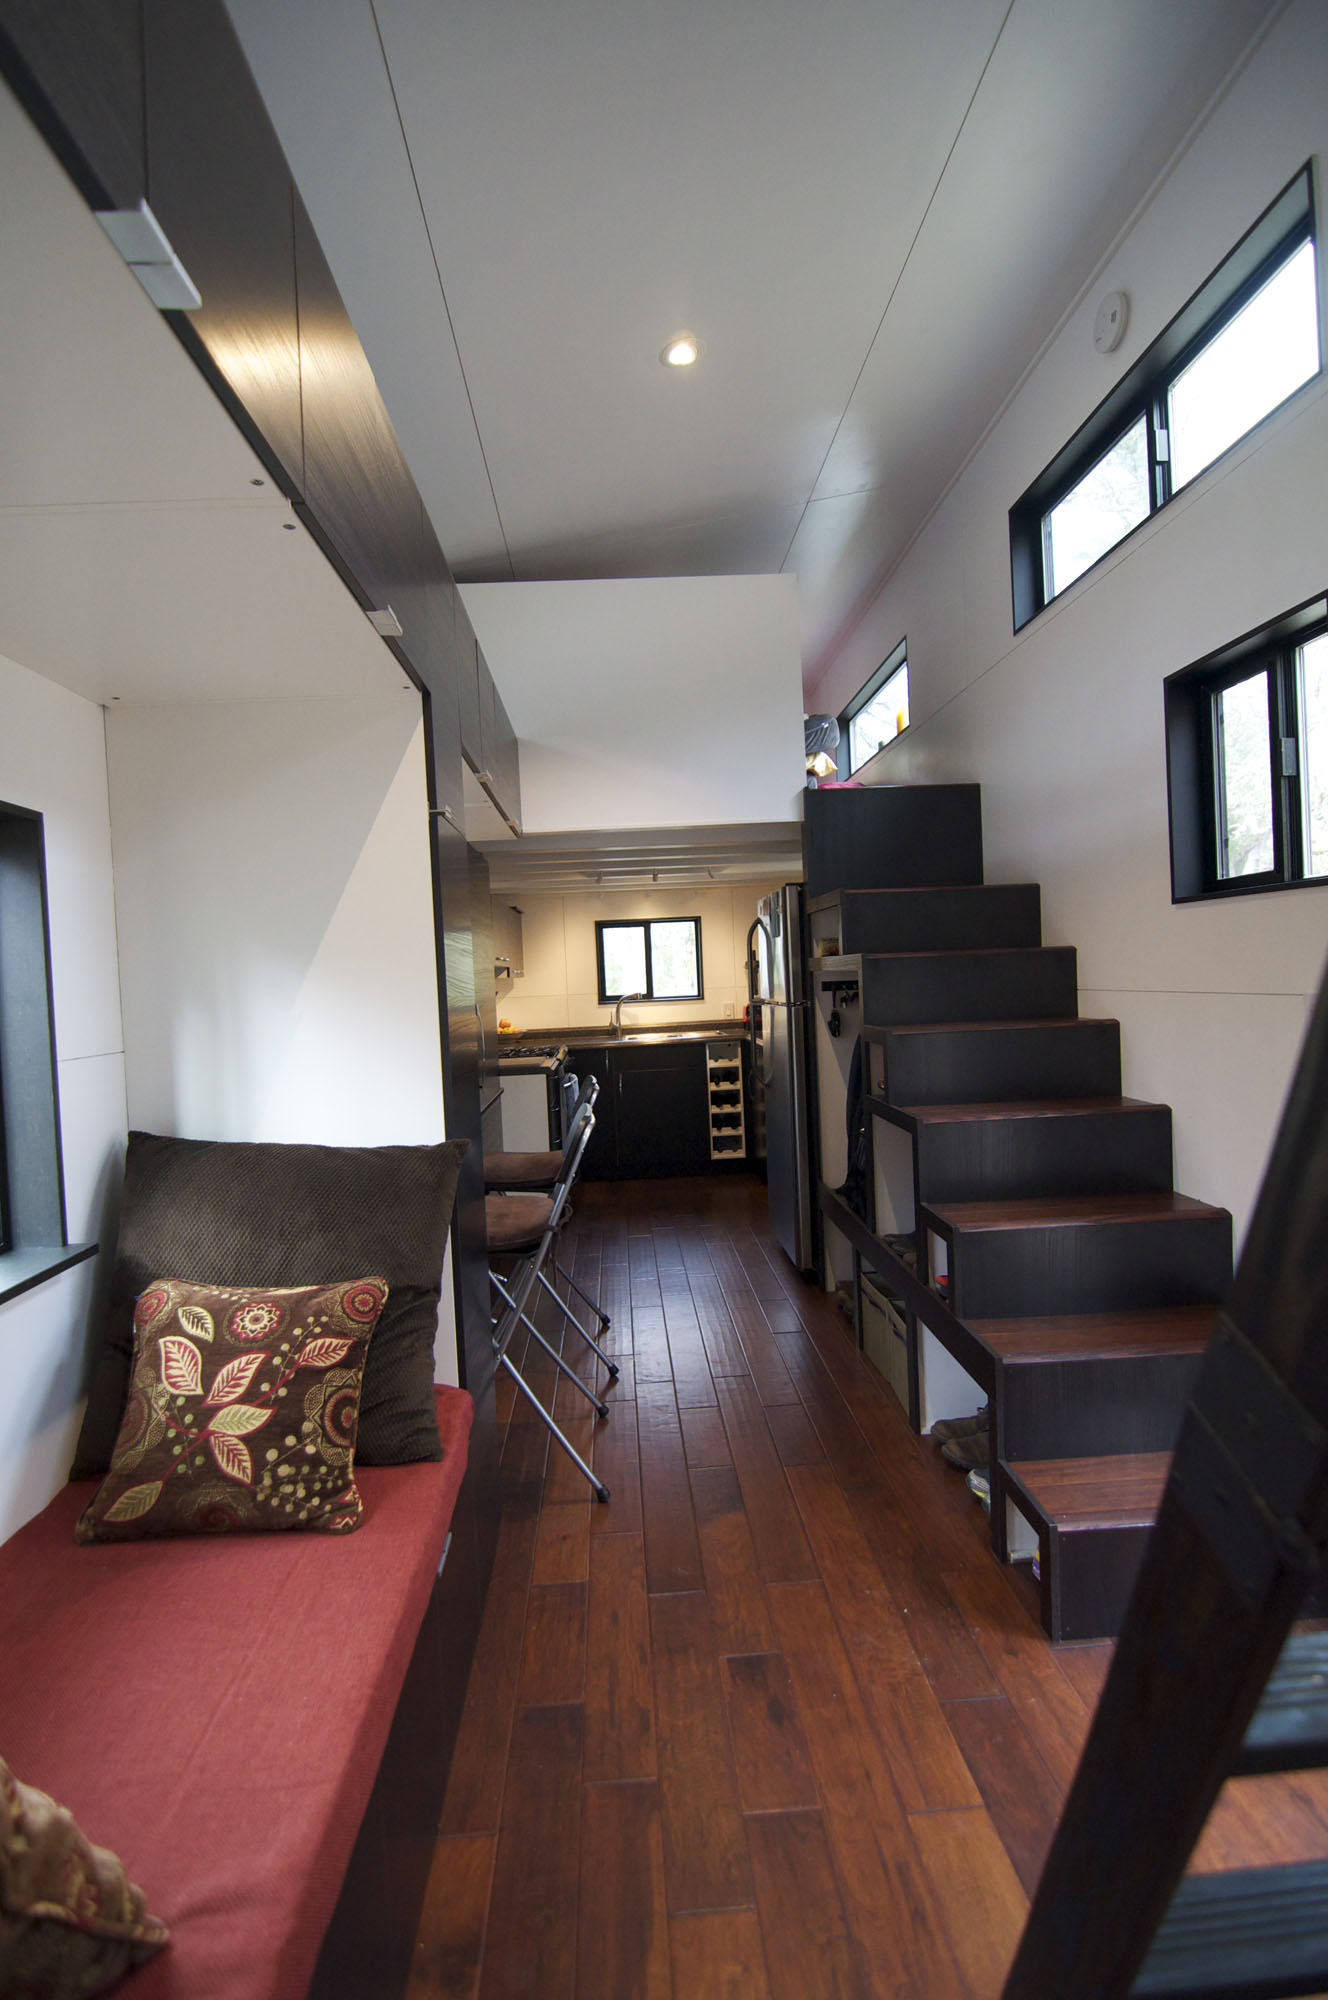 tiny wheels stairs living interior homes stair space gabriella morrison andrew modern inside trailer storage designs mobile layout lofts couple